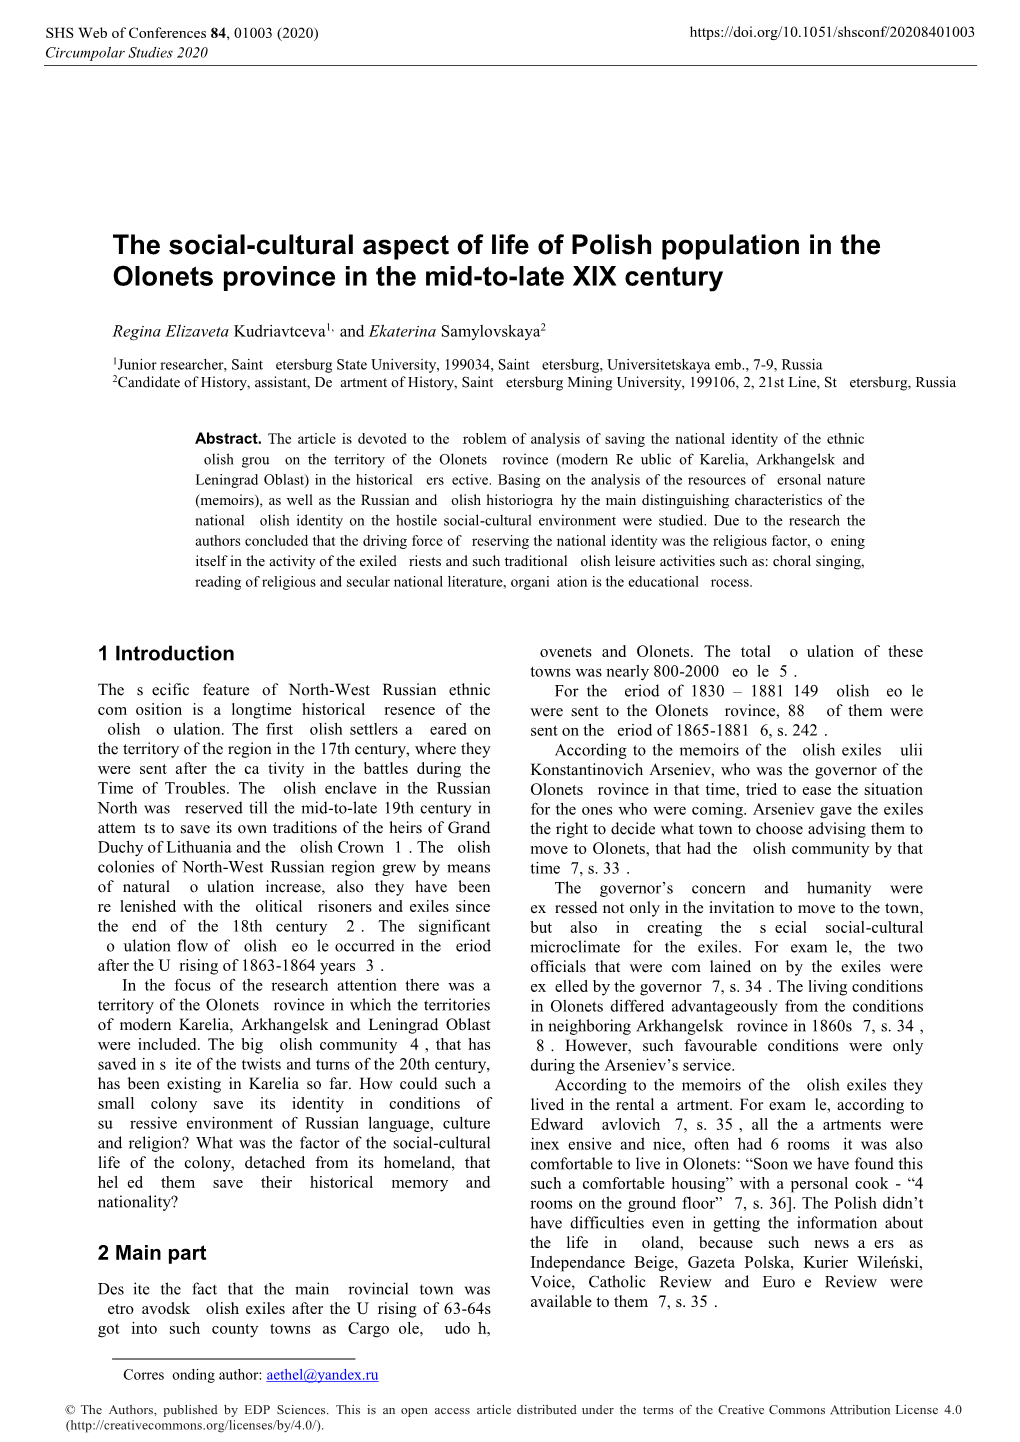 The Social-Cultural Aspect of Life of Polish Population in the Olonets Province in the Mid-To-Late XIX Century